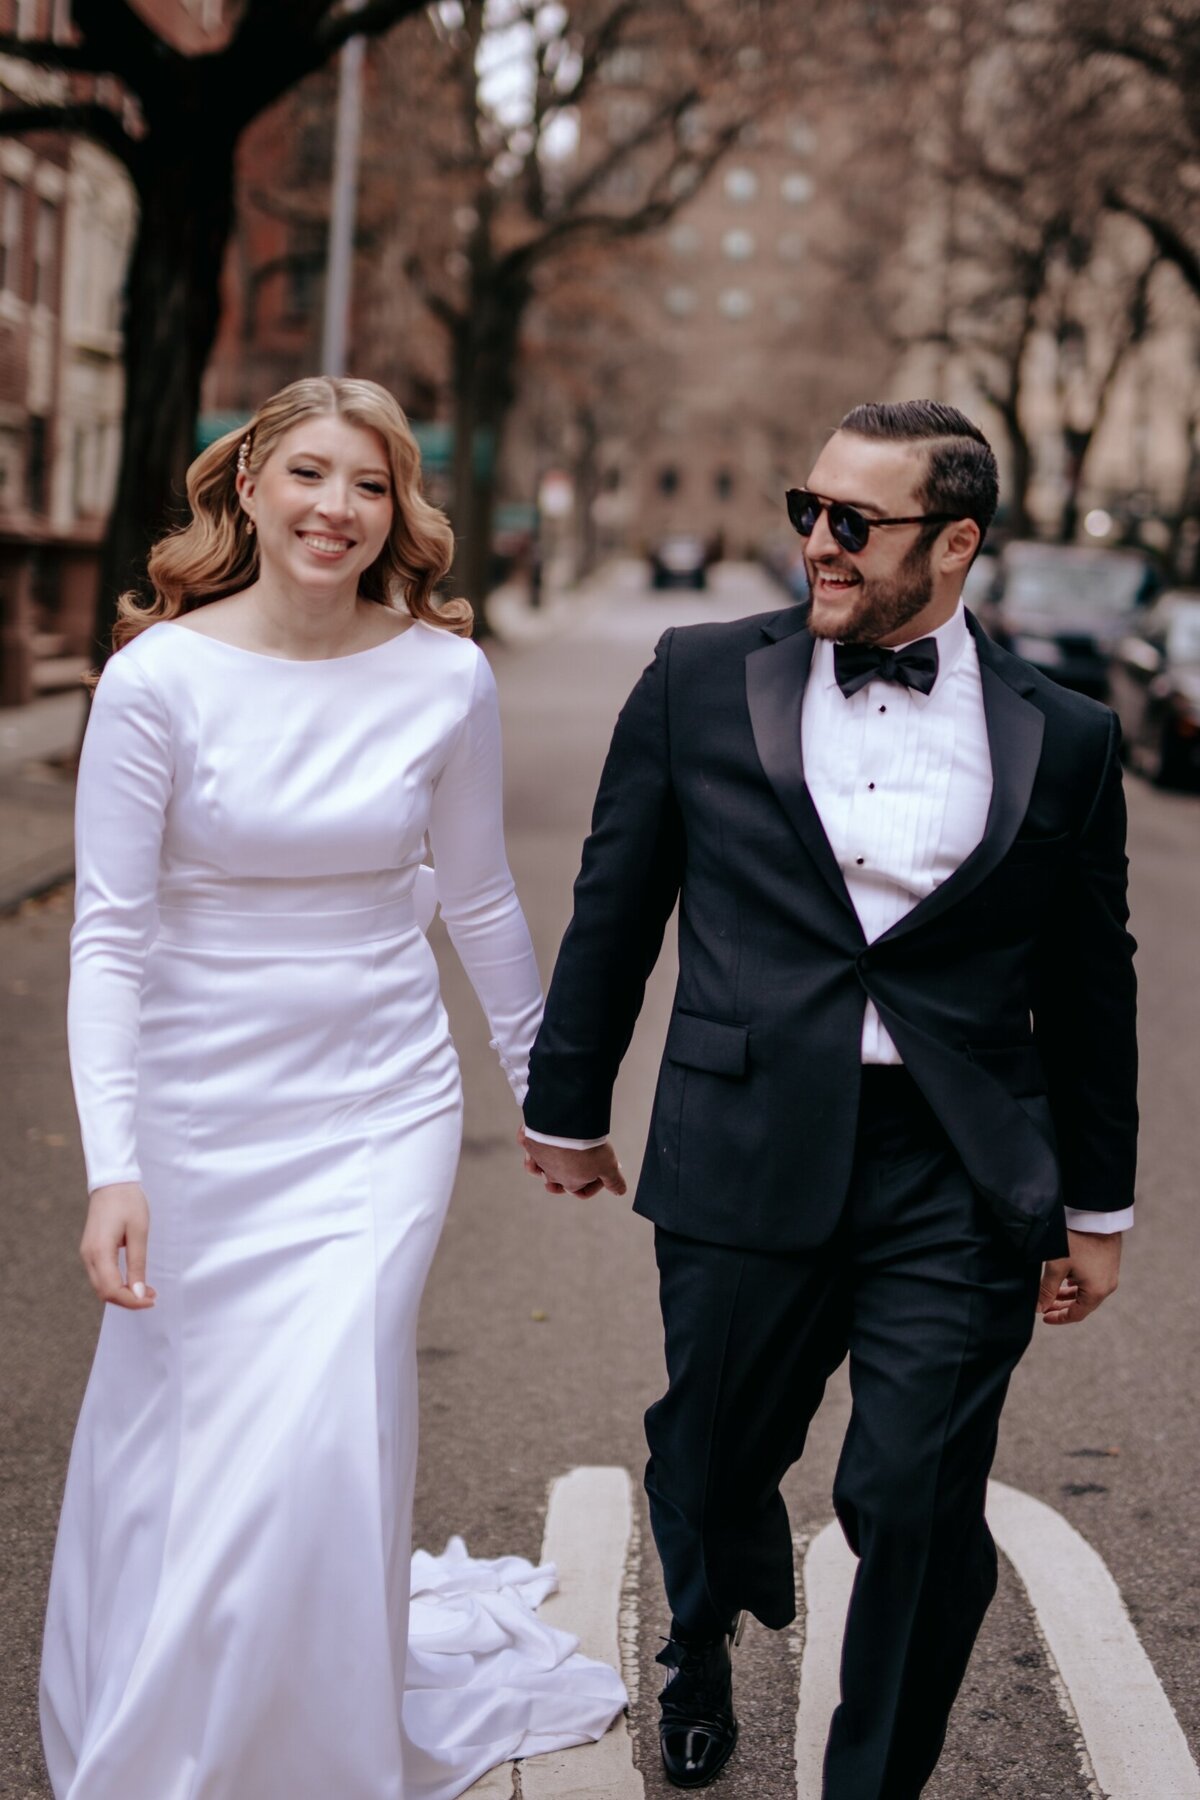 Bride and Groom holding hands walking down a street in NYC just after saying I Do.